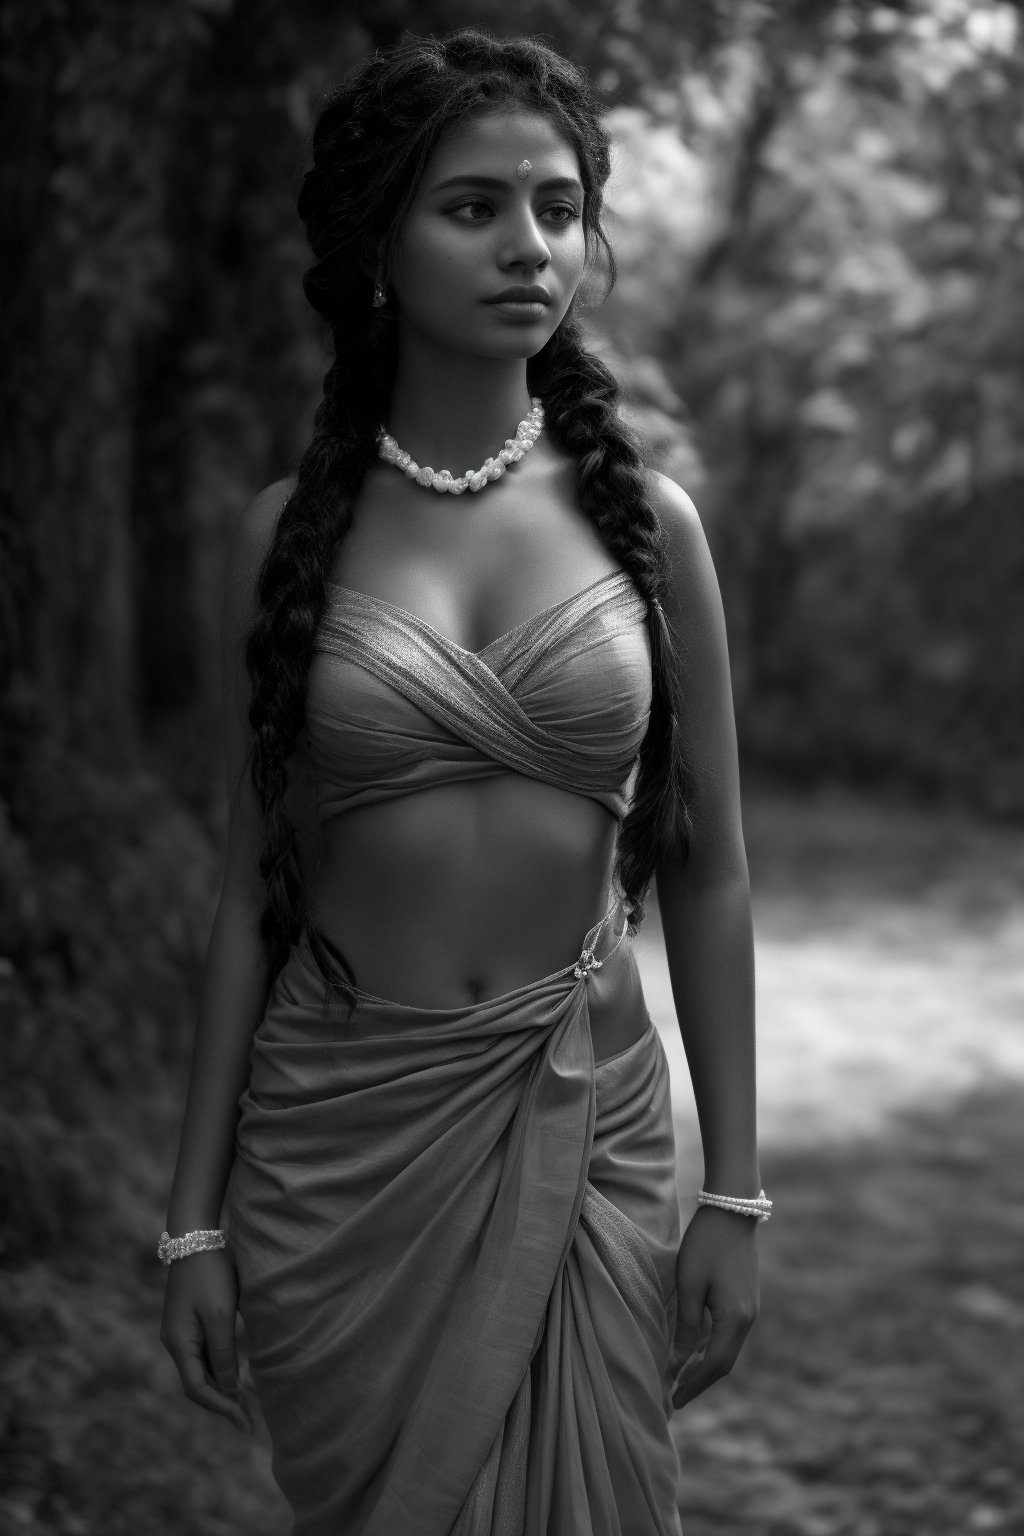 In a flower grand, a 28-year-old woman with braided hair stands solo-focused in front view, her stunning saree flowing from her navel. The camera captures the sultry shot as she confidently showcases her curvy figure. Her braided hair tail fall down to hip,  A pearl necklace adorns her neck, complemented by dangling earrings and a bracelet that catches the light. Her lips pout slightly,Saree,Big eyes 